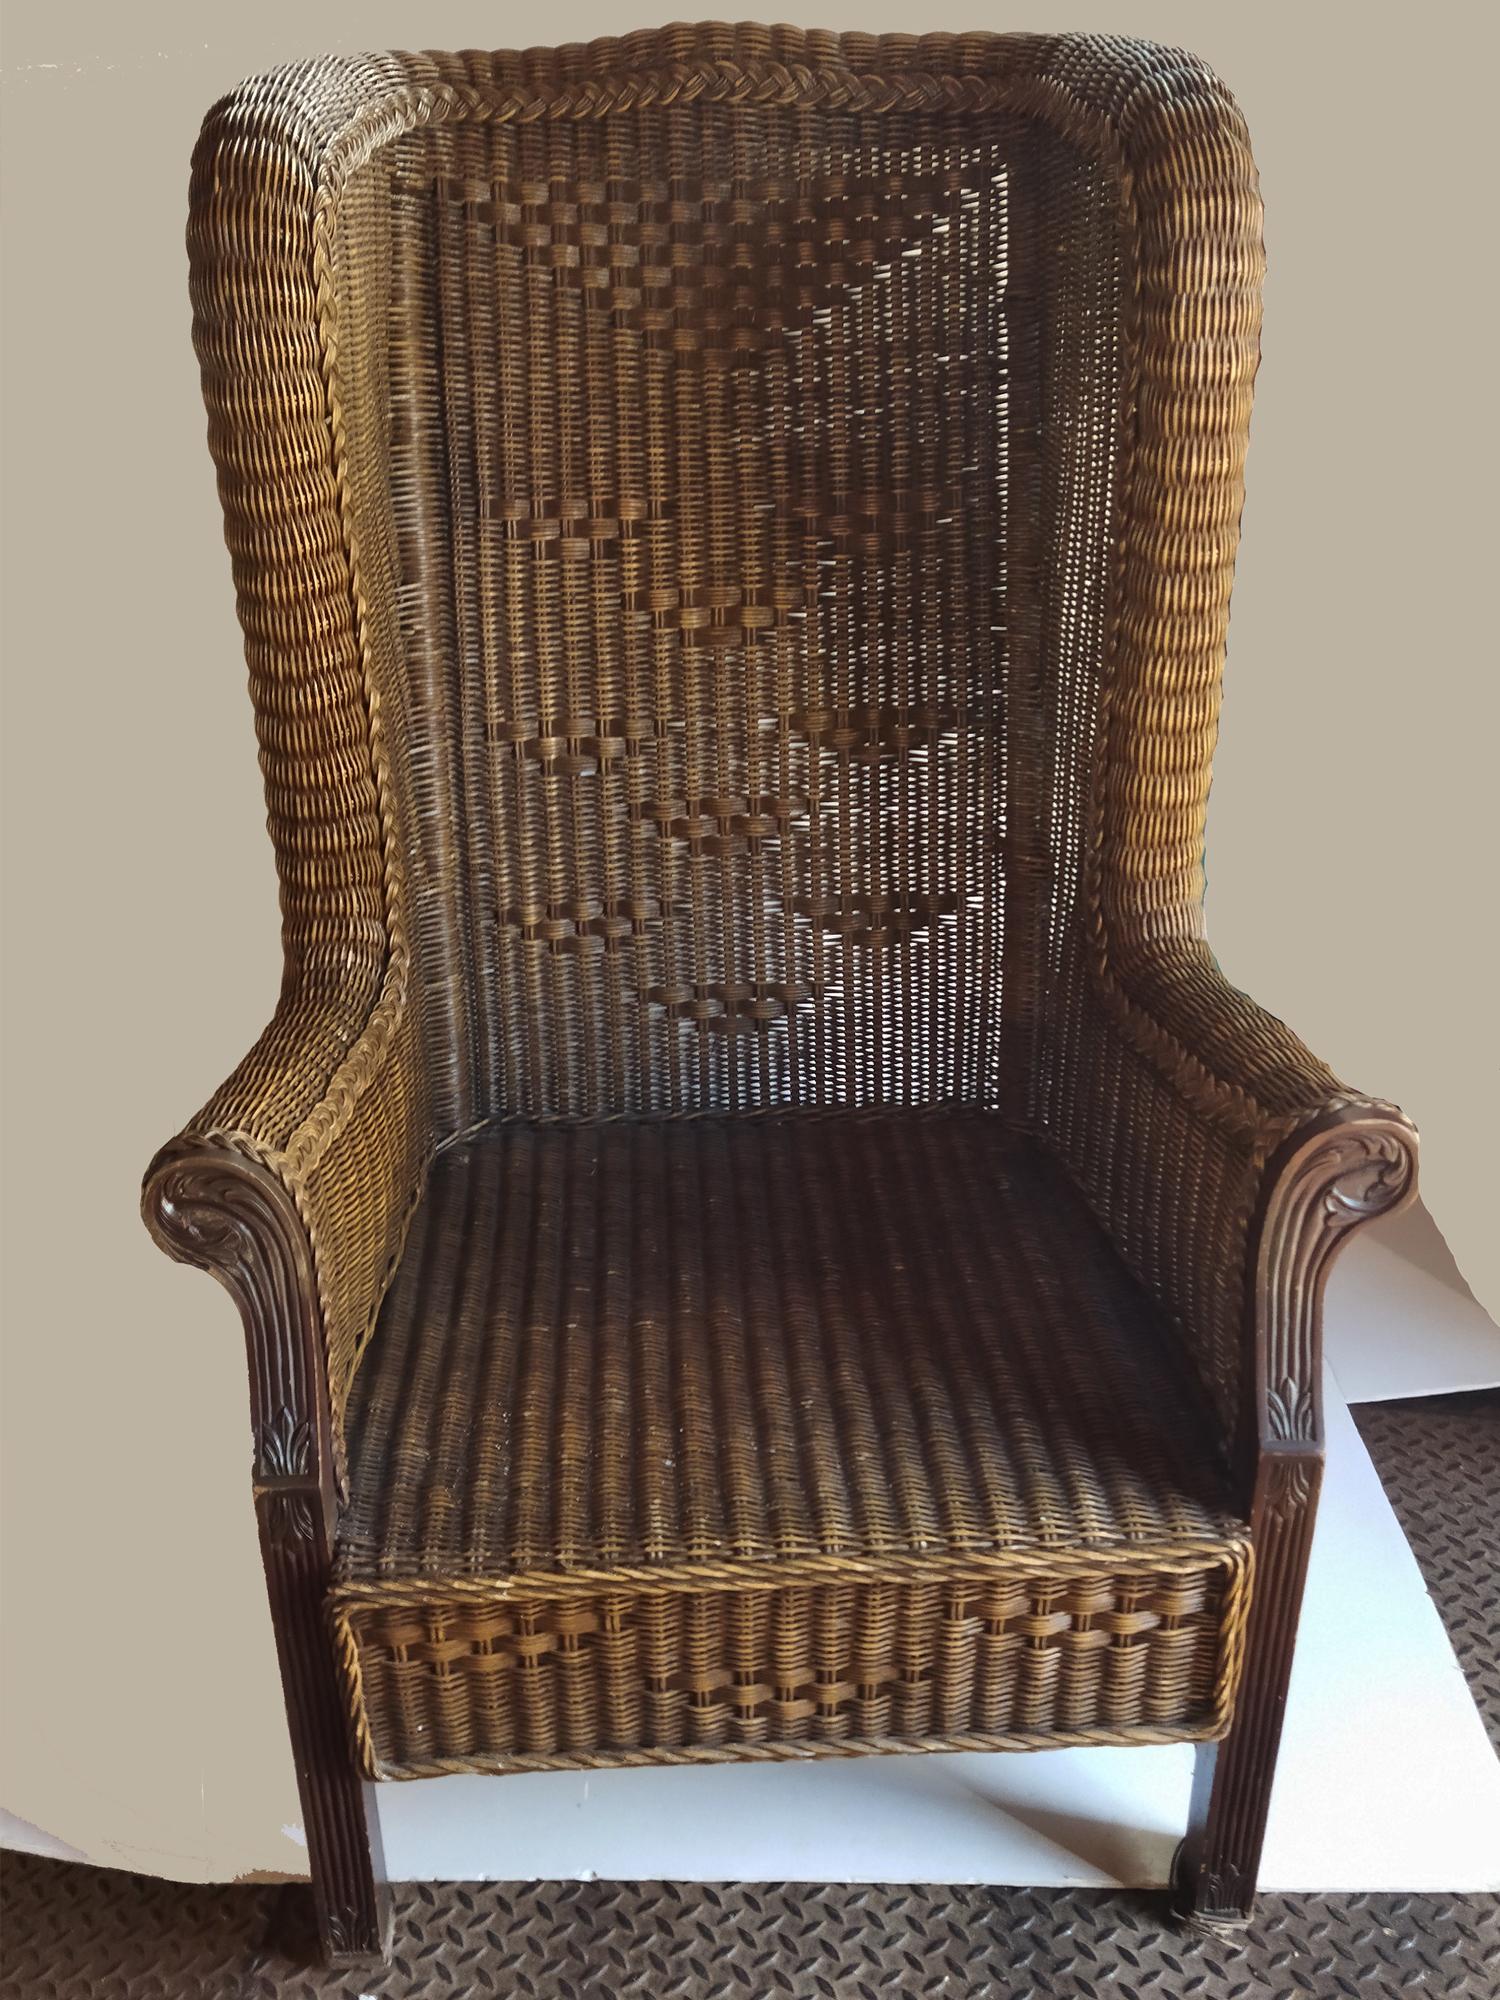  Spectacular VictorianStyle  Wicker Throne, Very Big  High Backrest  Wide Seat For Sale 6